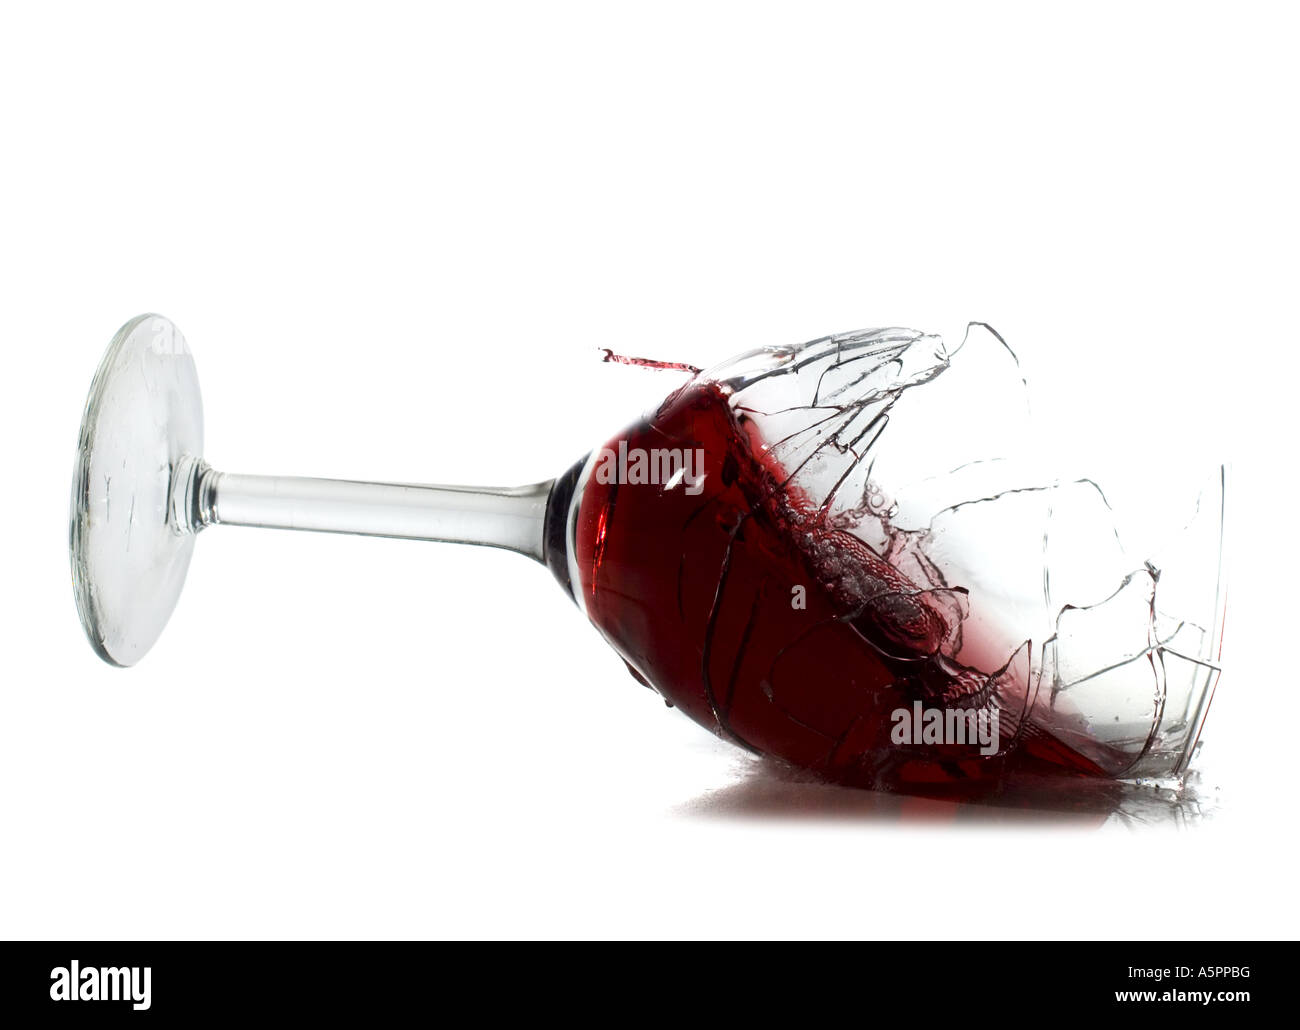 Falling glass of red wine Stock Photo